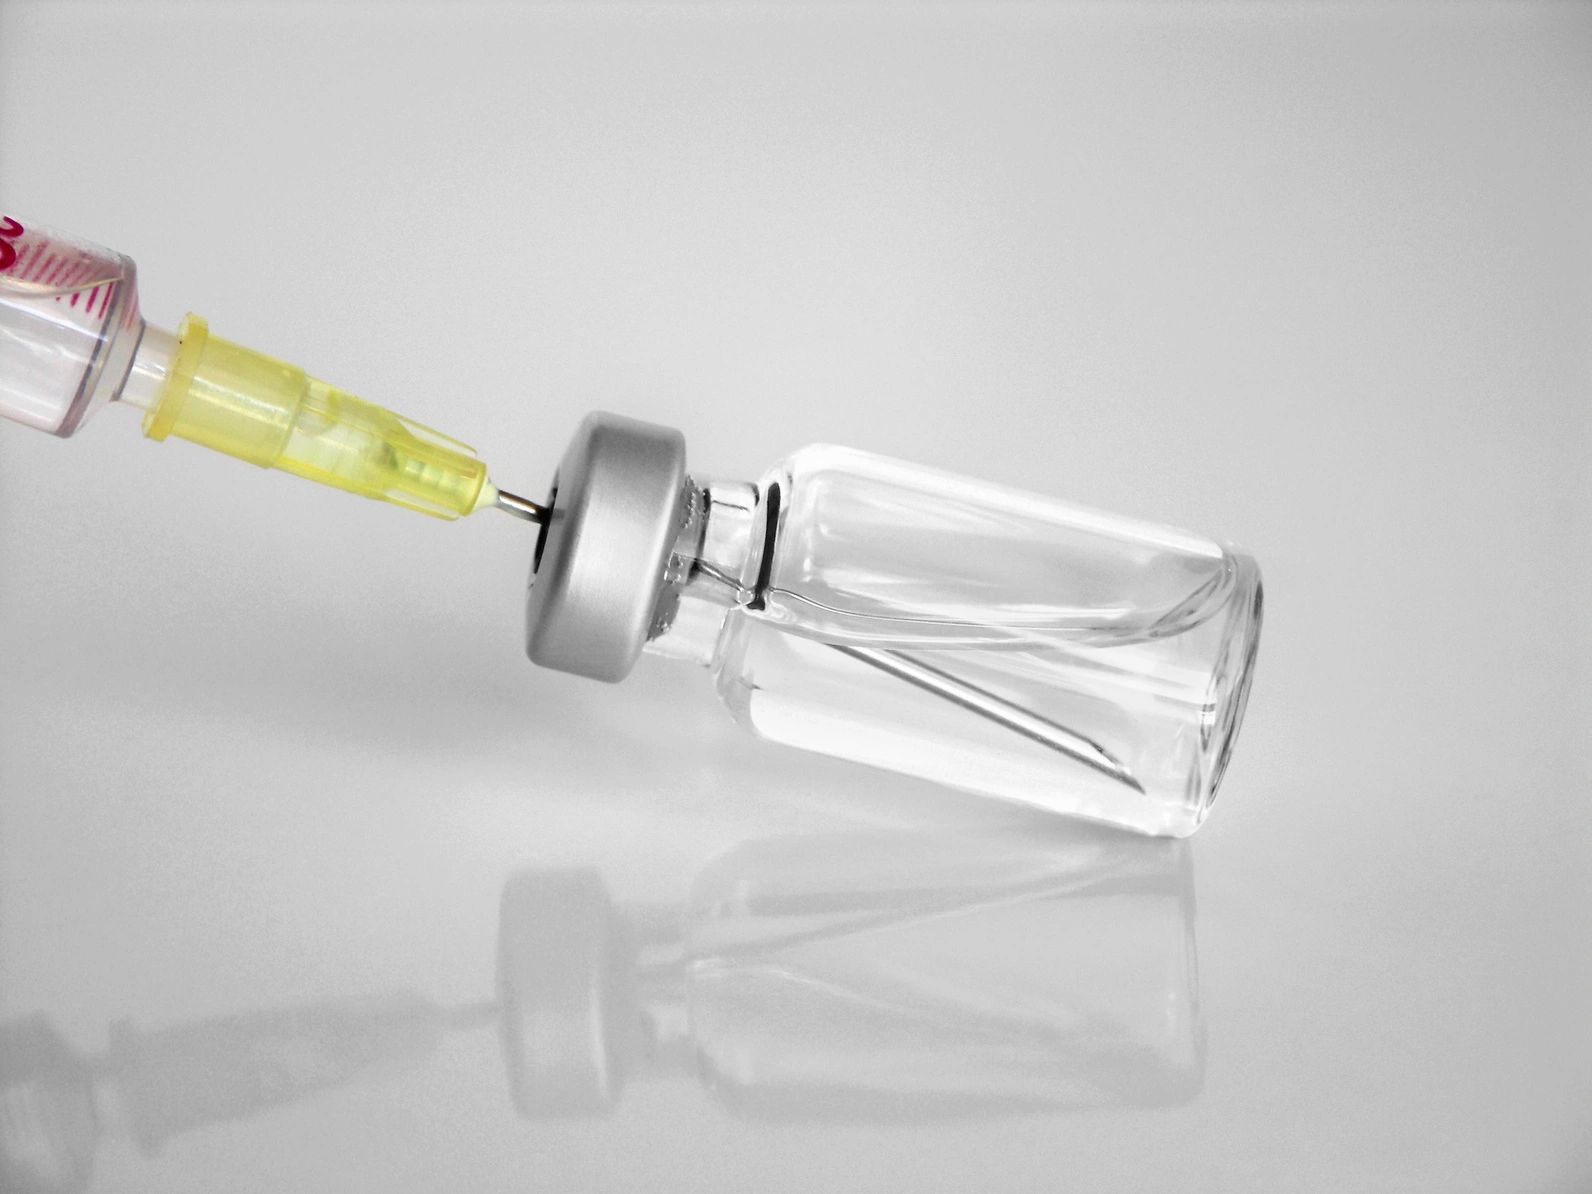 needle inserted into vaccine vial